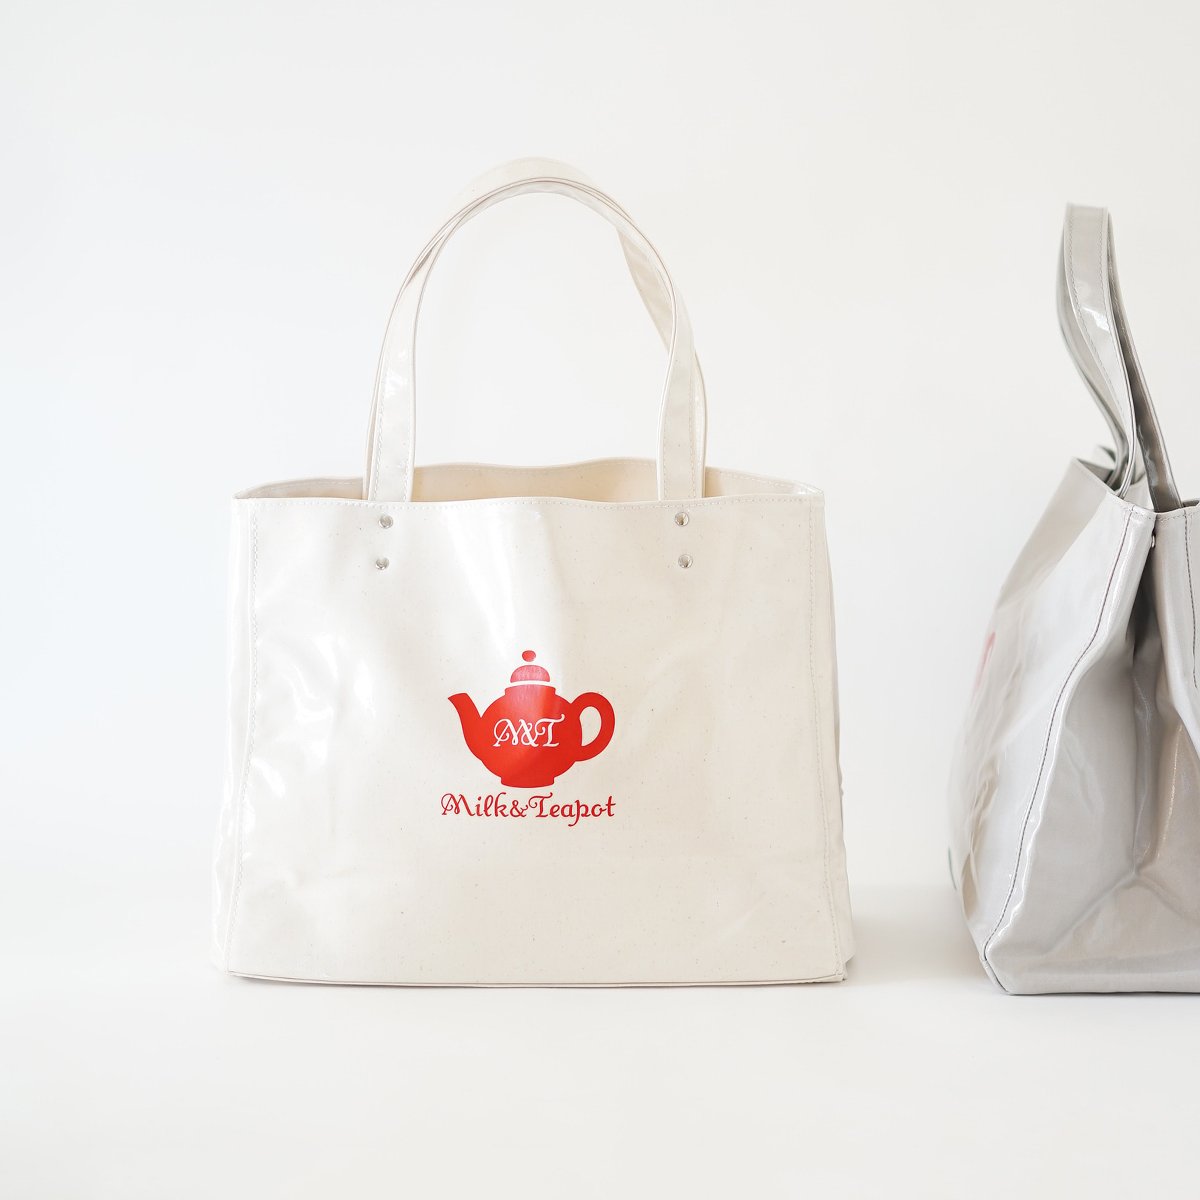 TEMBEA］CARRY TOTE / ナチュラル | M AND T PRODUCT